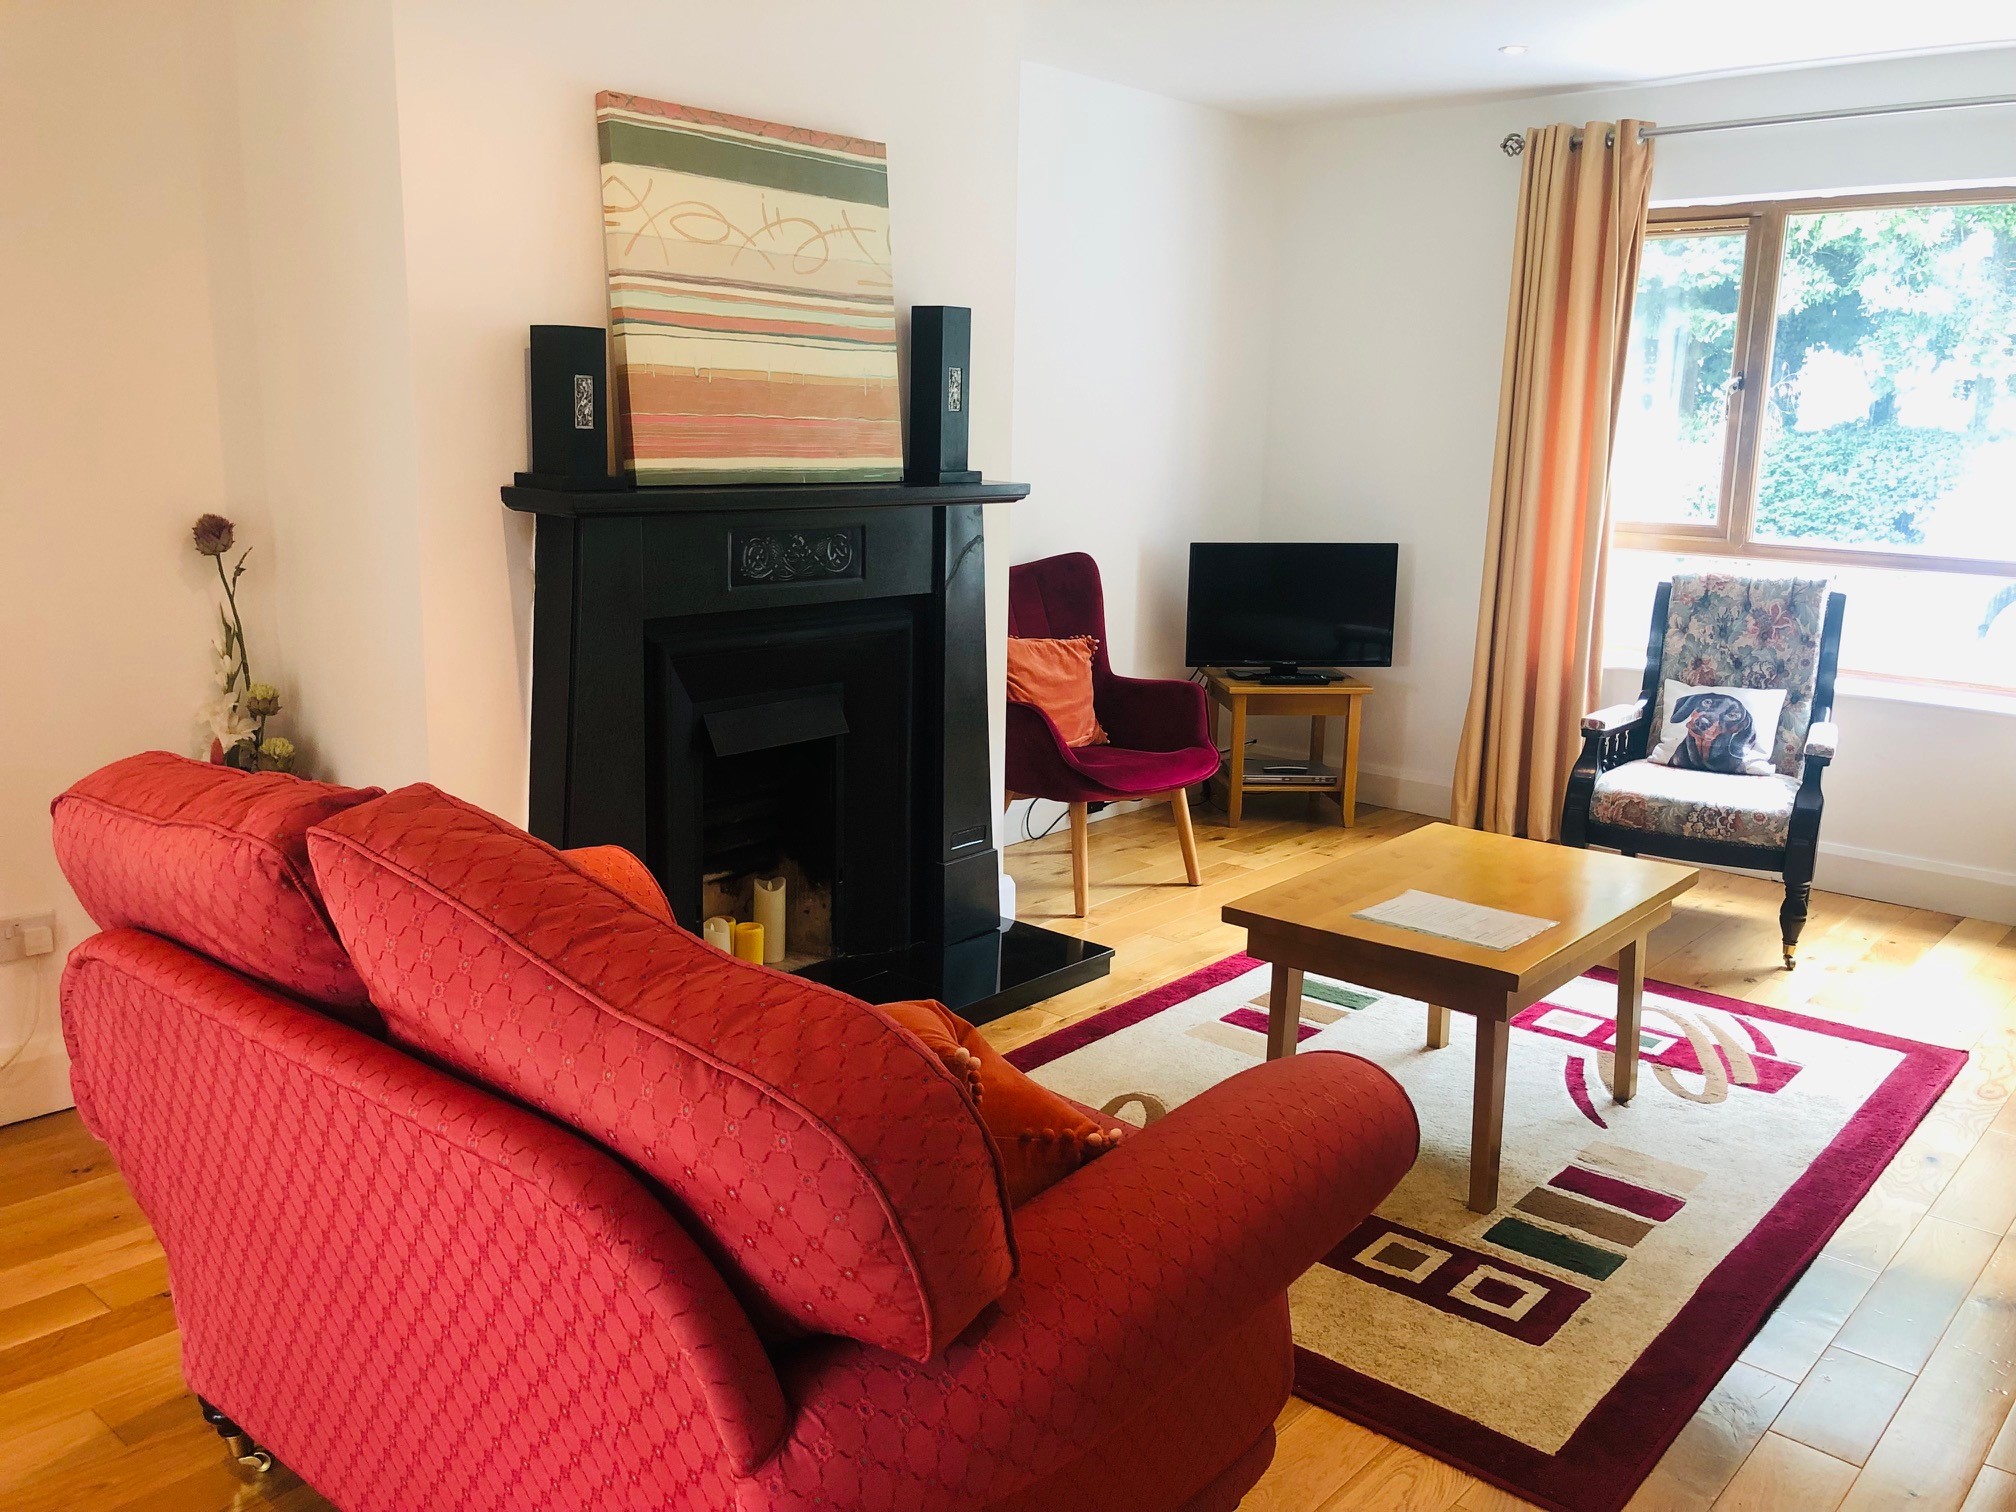 Property Image 2 - 3 bedroom home easy walking distance to Kenmare town